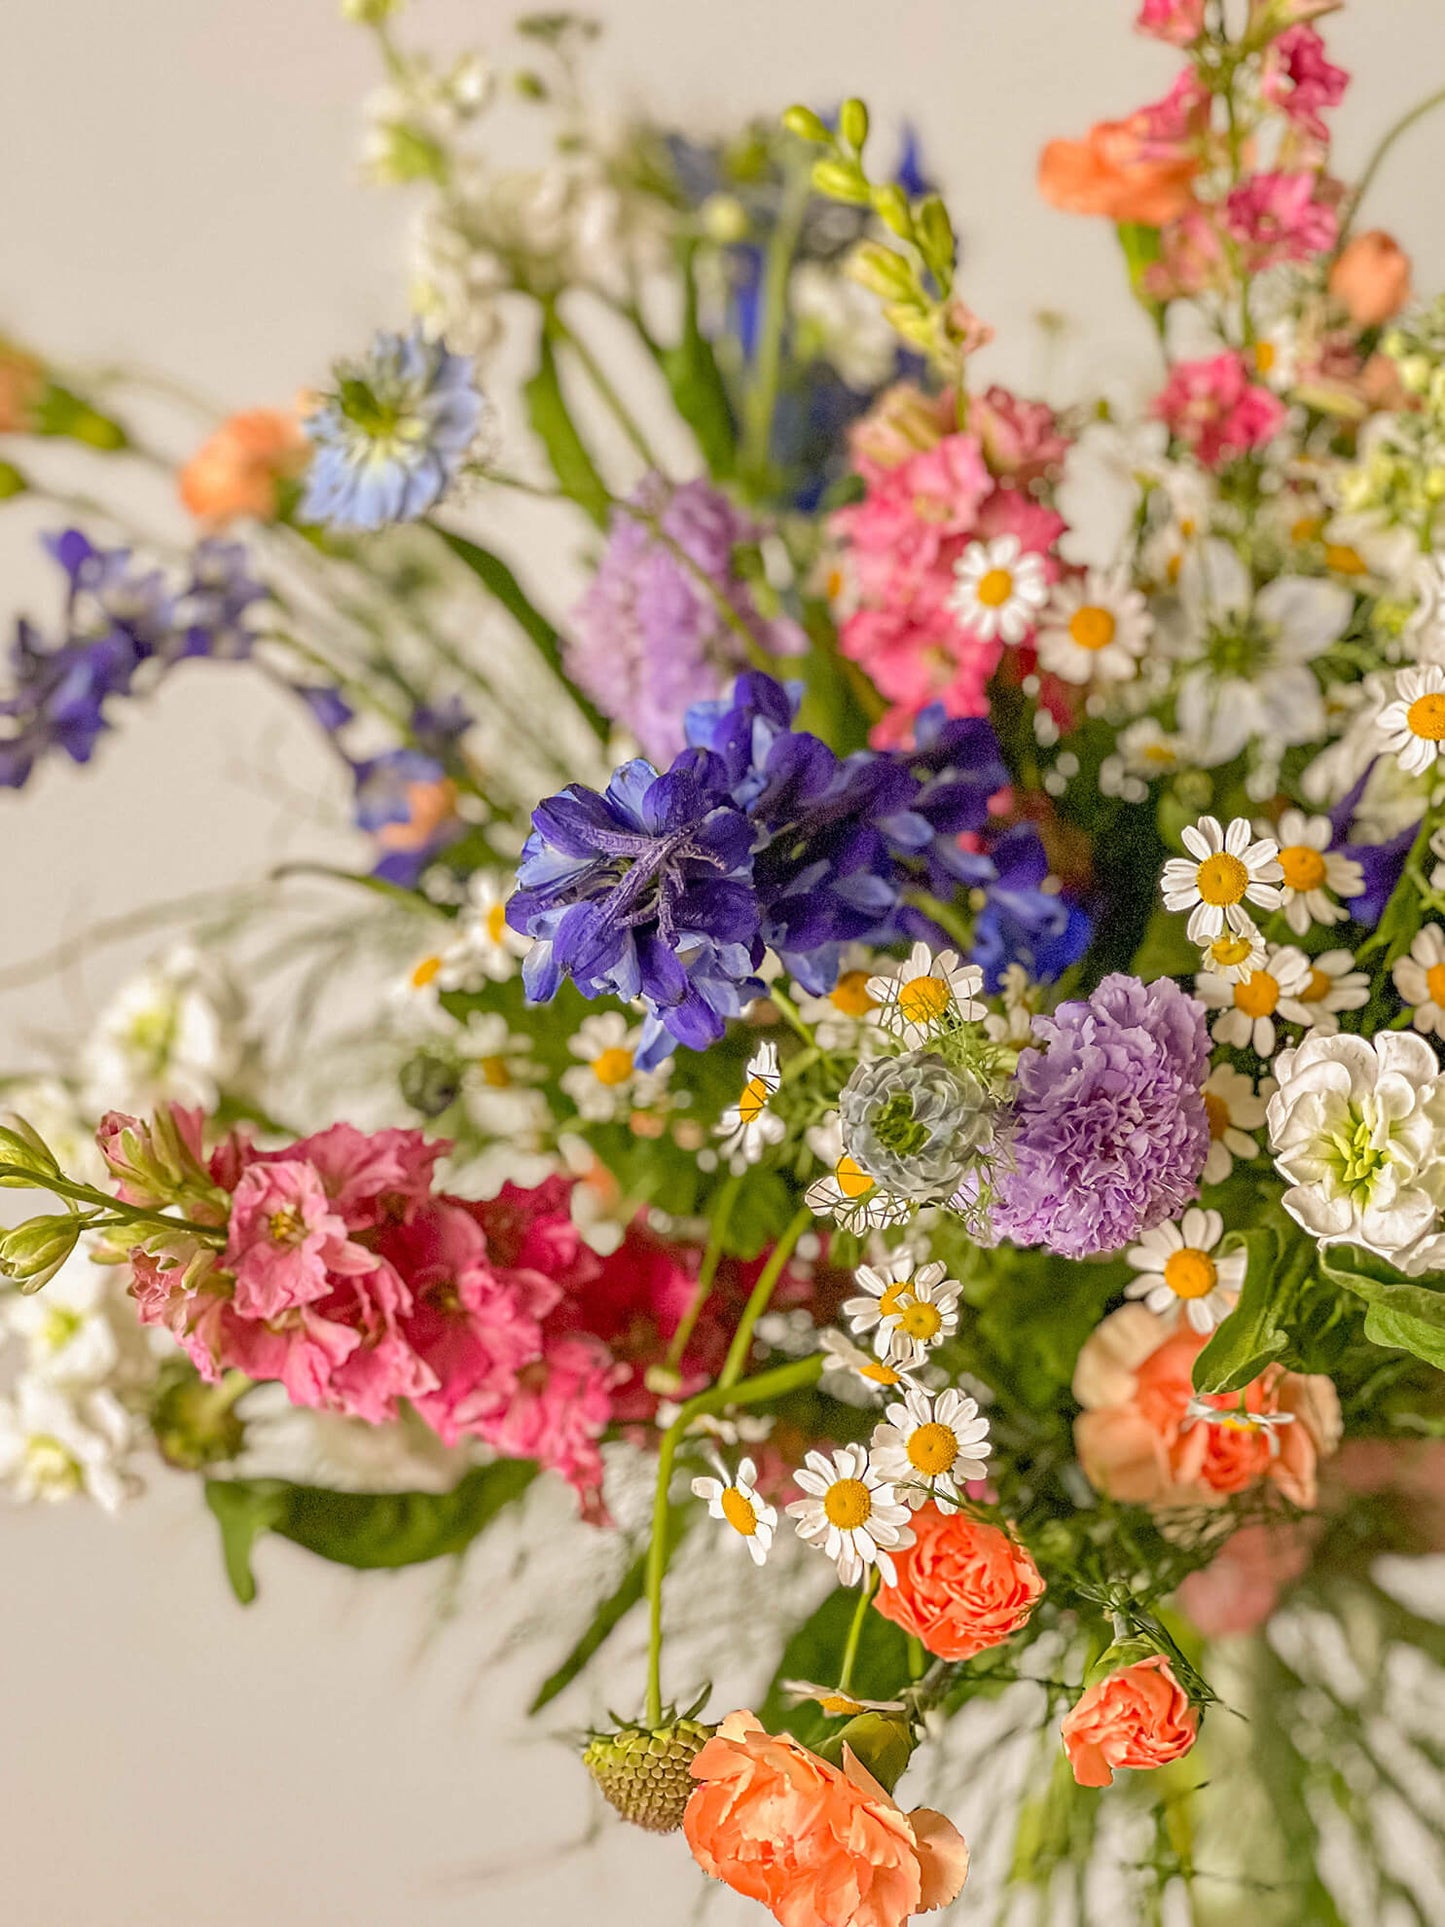 Adore Flowers Wild Bouquet - Vibrant Assorted Wildflowers in a Rustic Arrangement